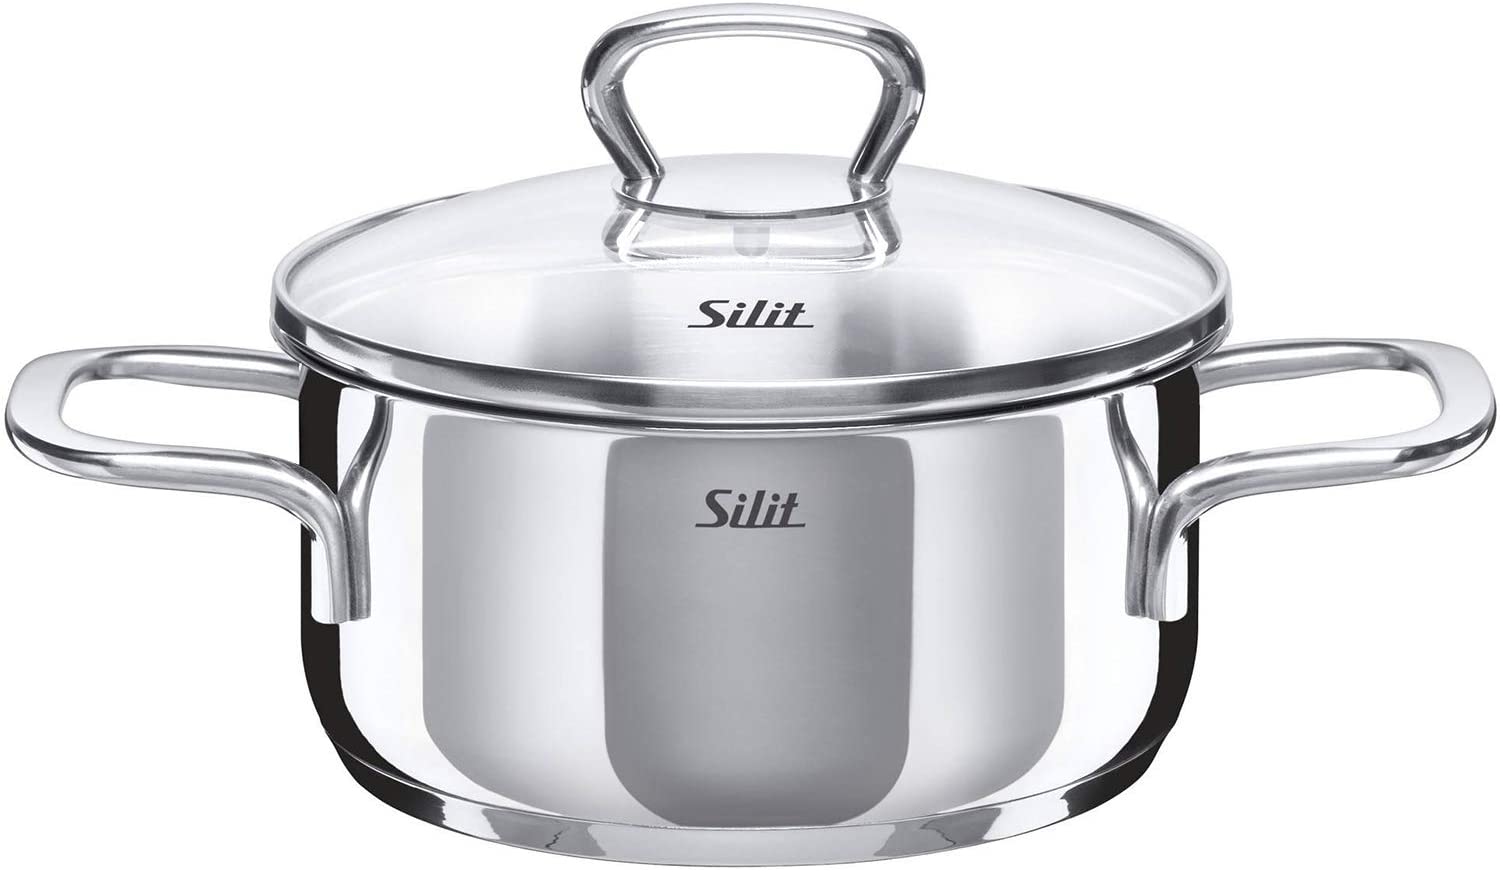 Silit Cooking Pot Style Cookware